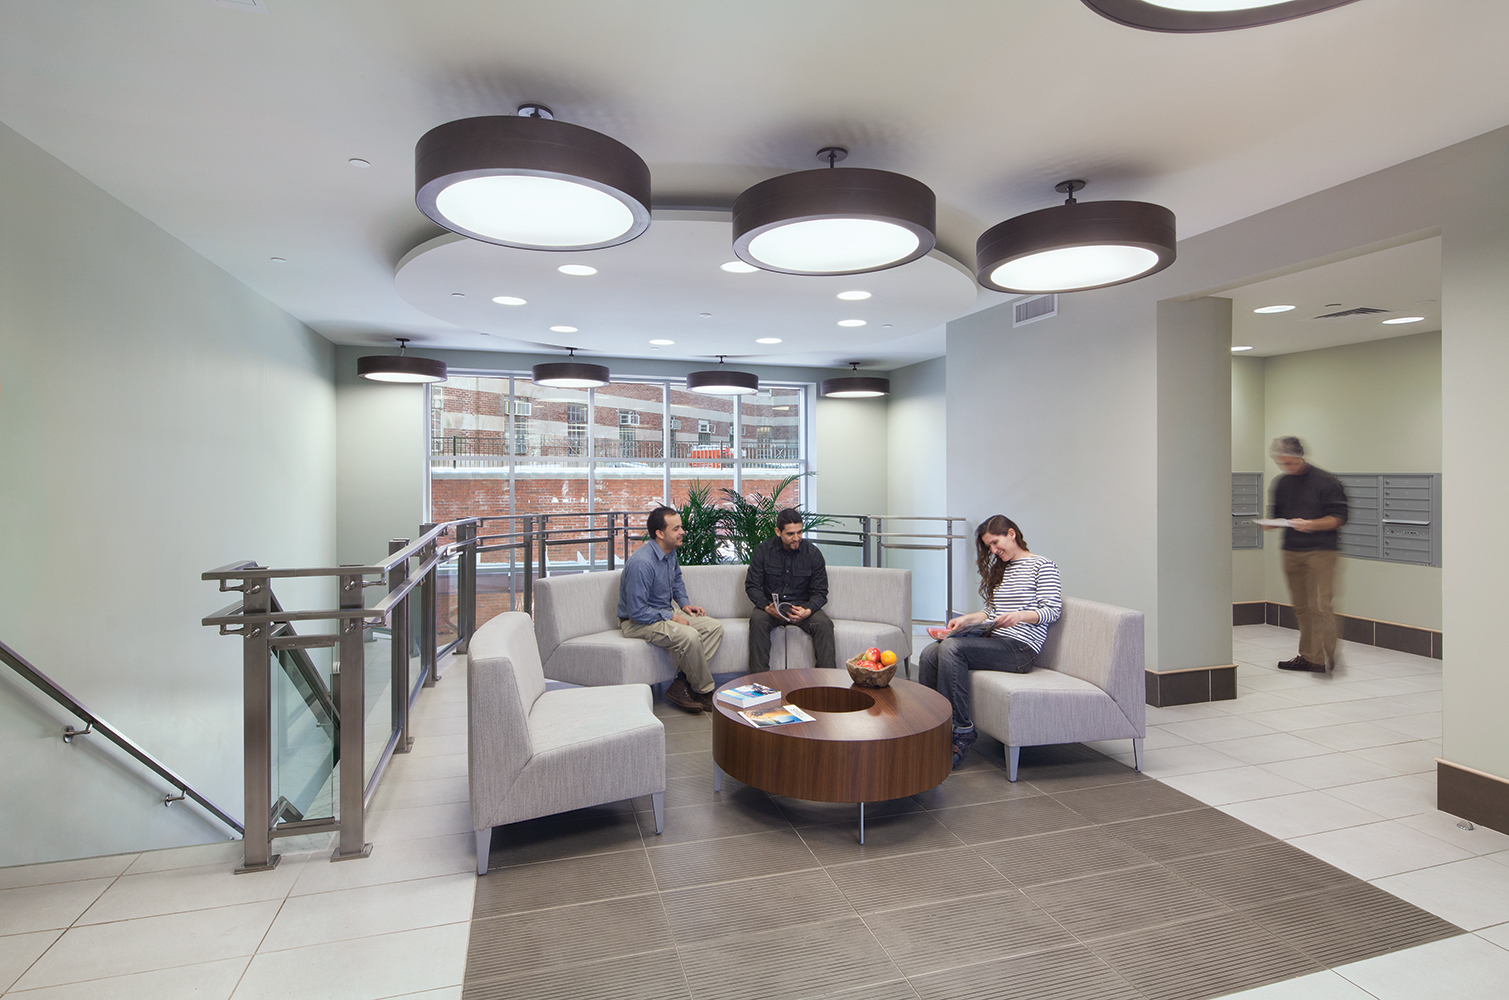 Omnience office lighting fixtures in a common seating area between a stairwell and a mailroom.